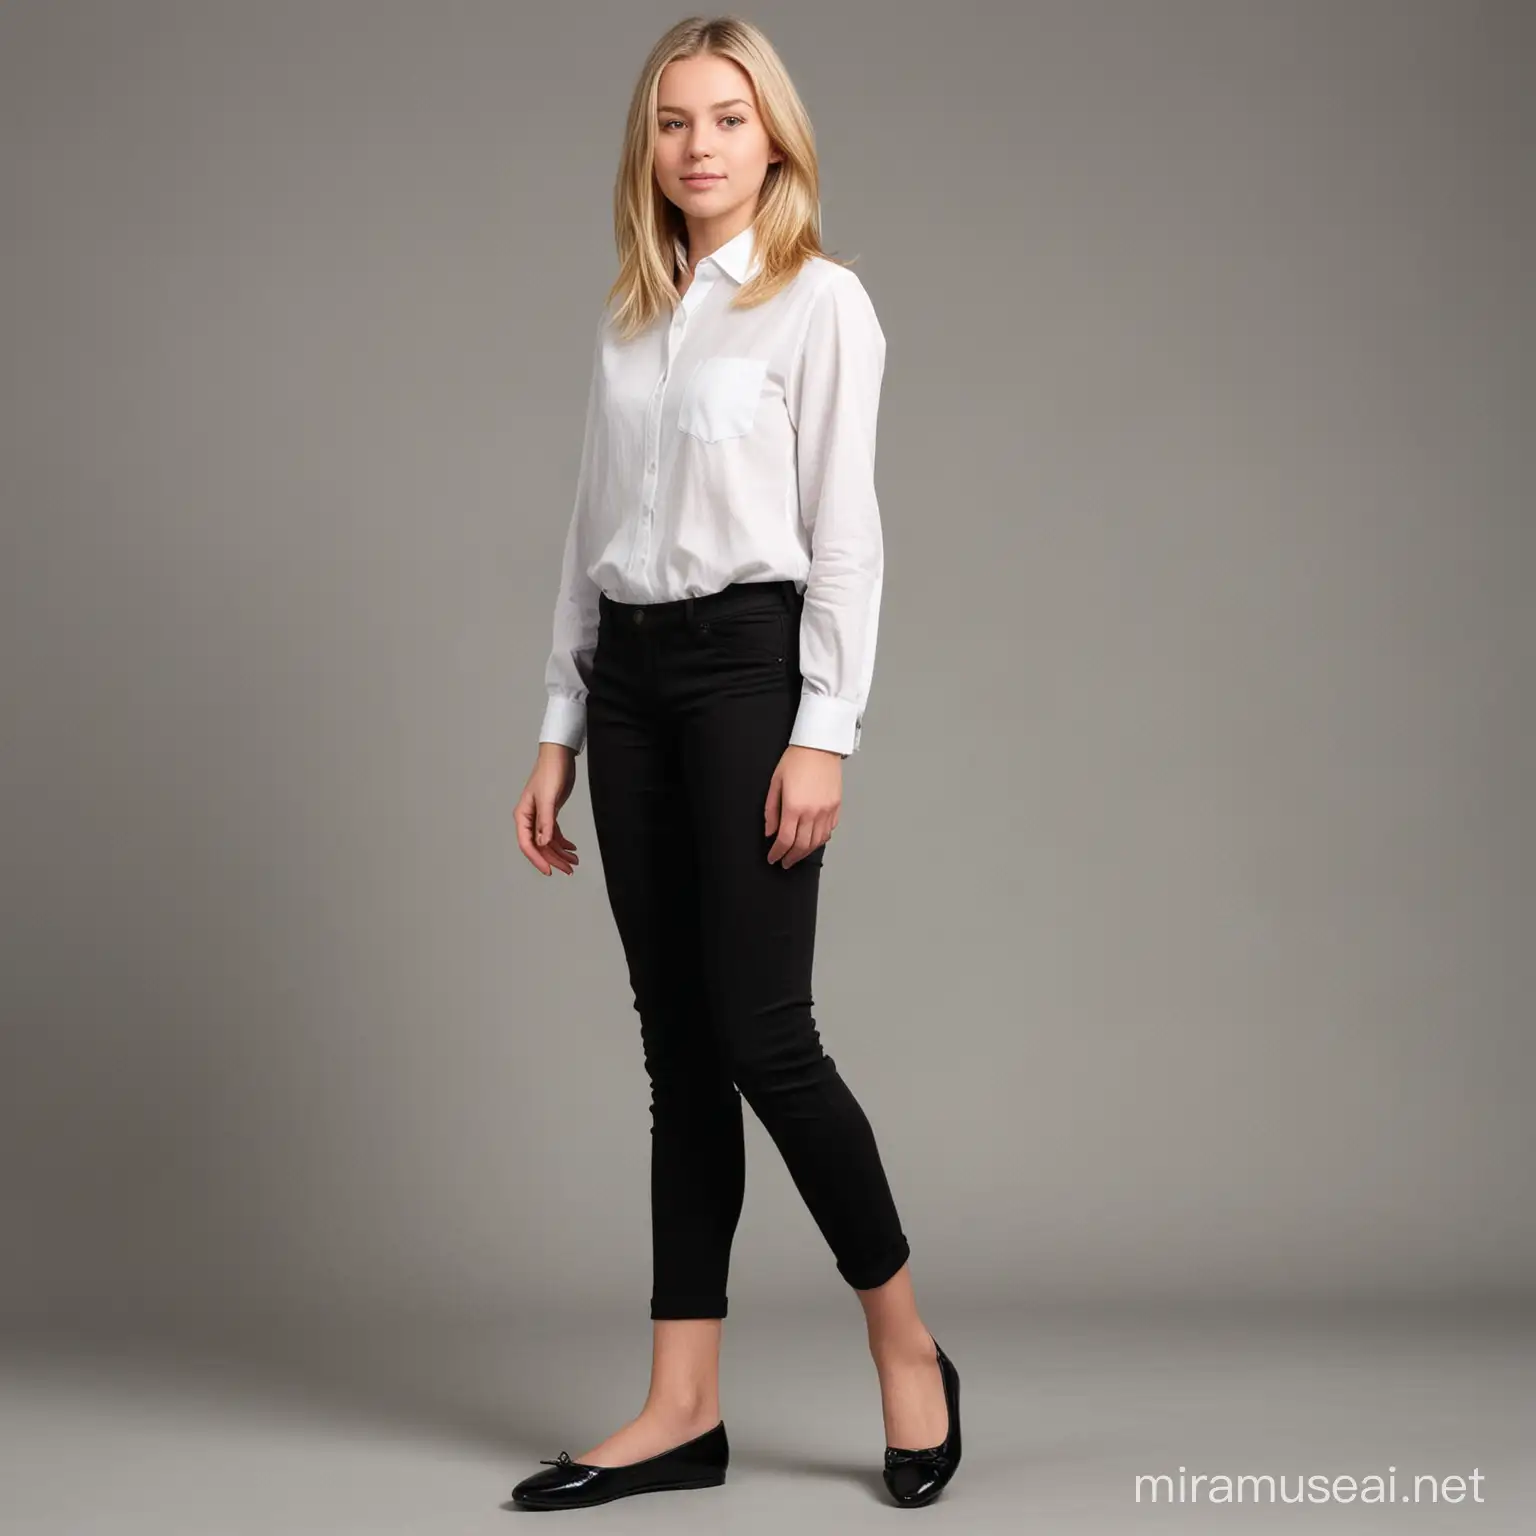 Teenage Caucasian Girl Portrait in Black Pants and White Shirt with Ballet Shoes